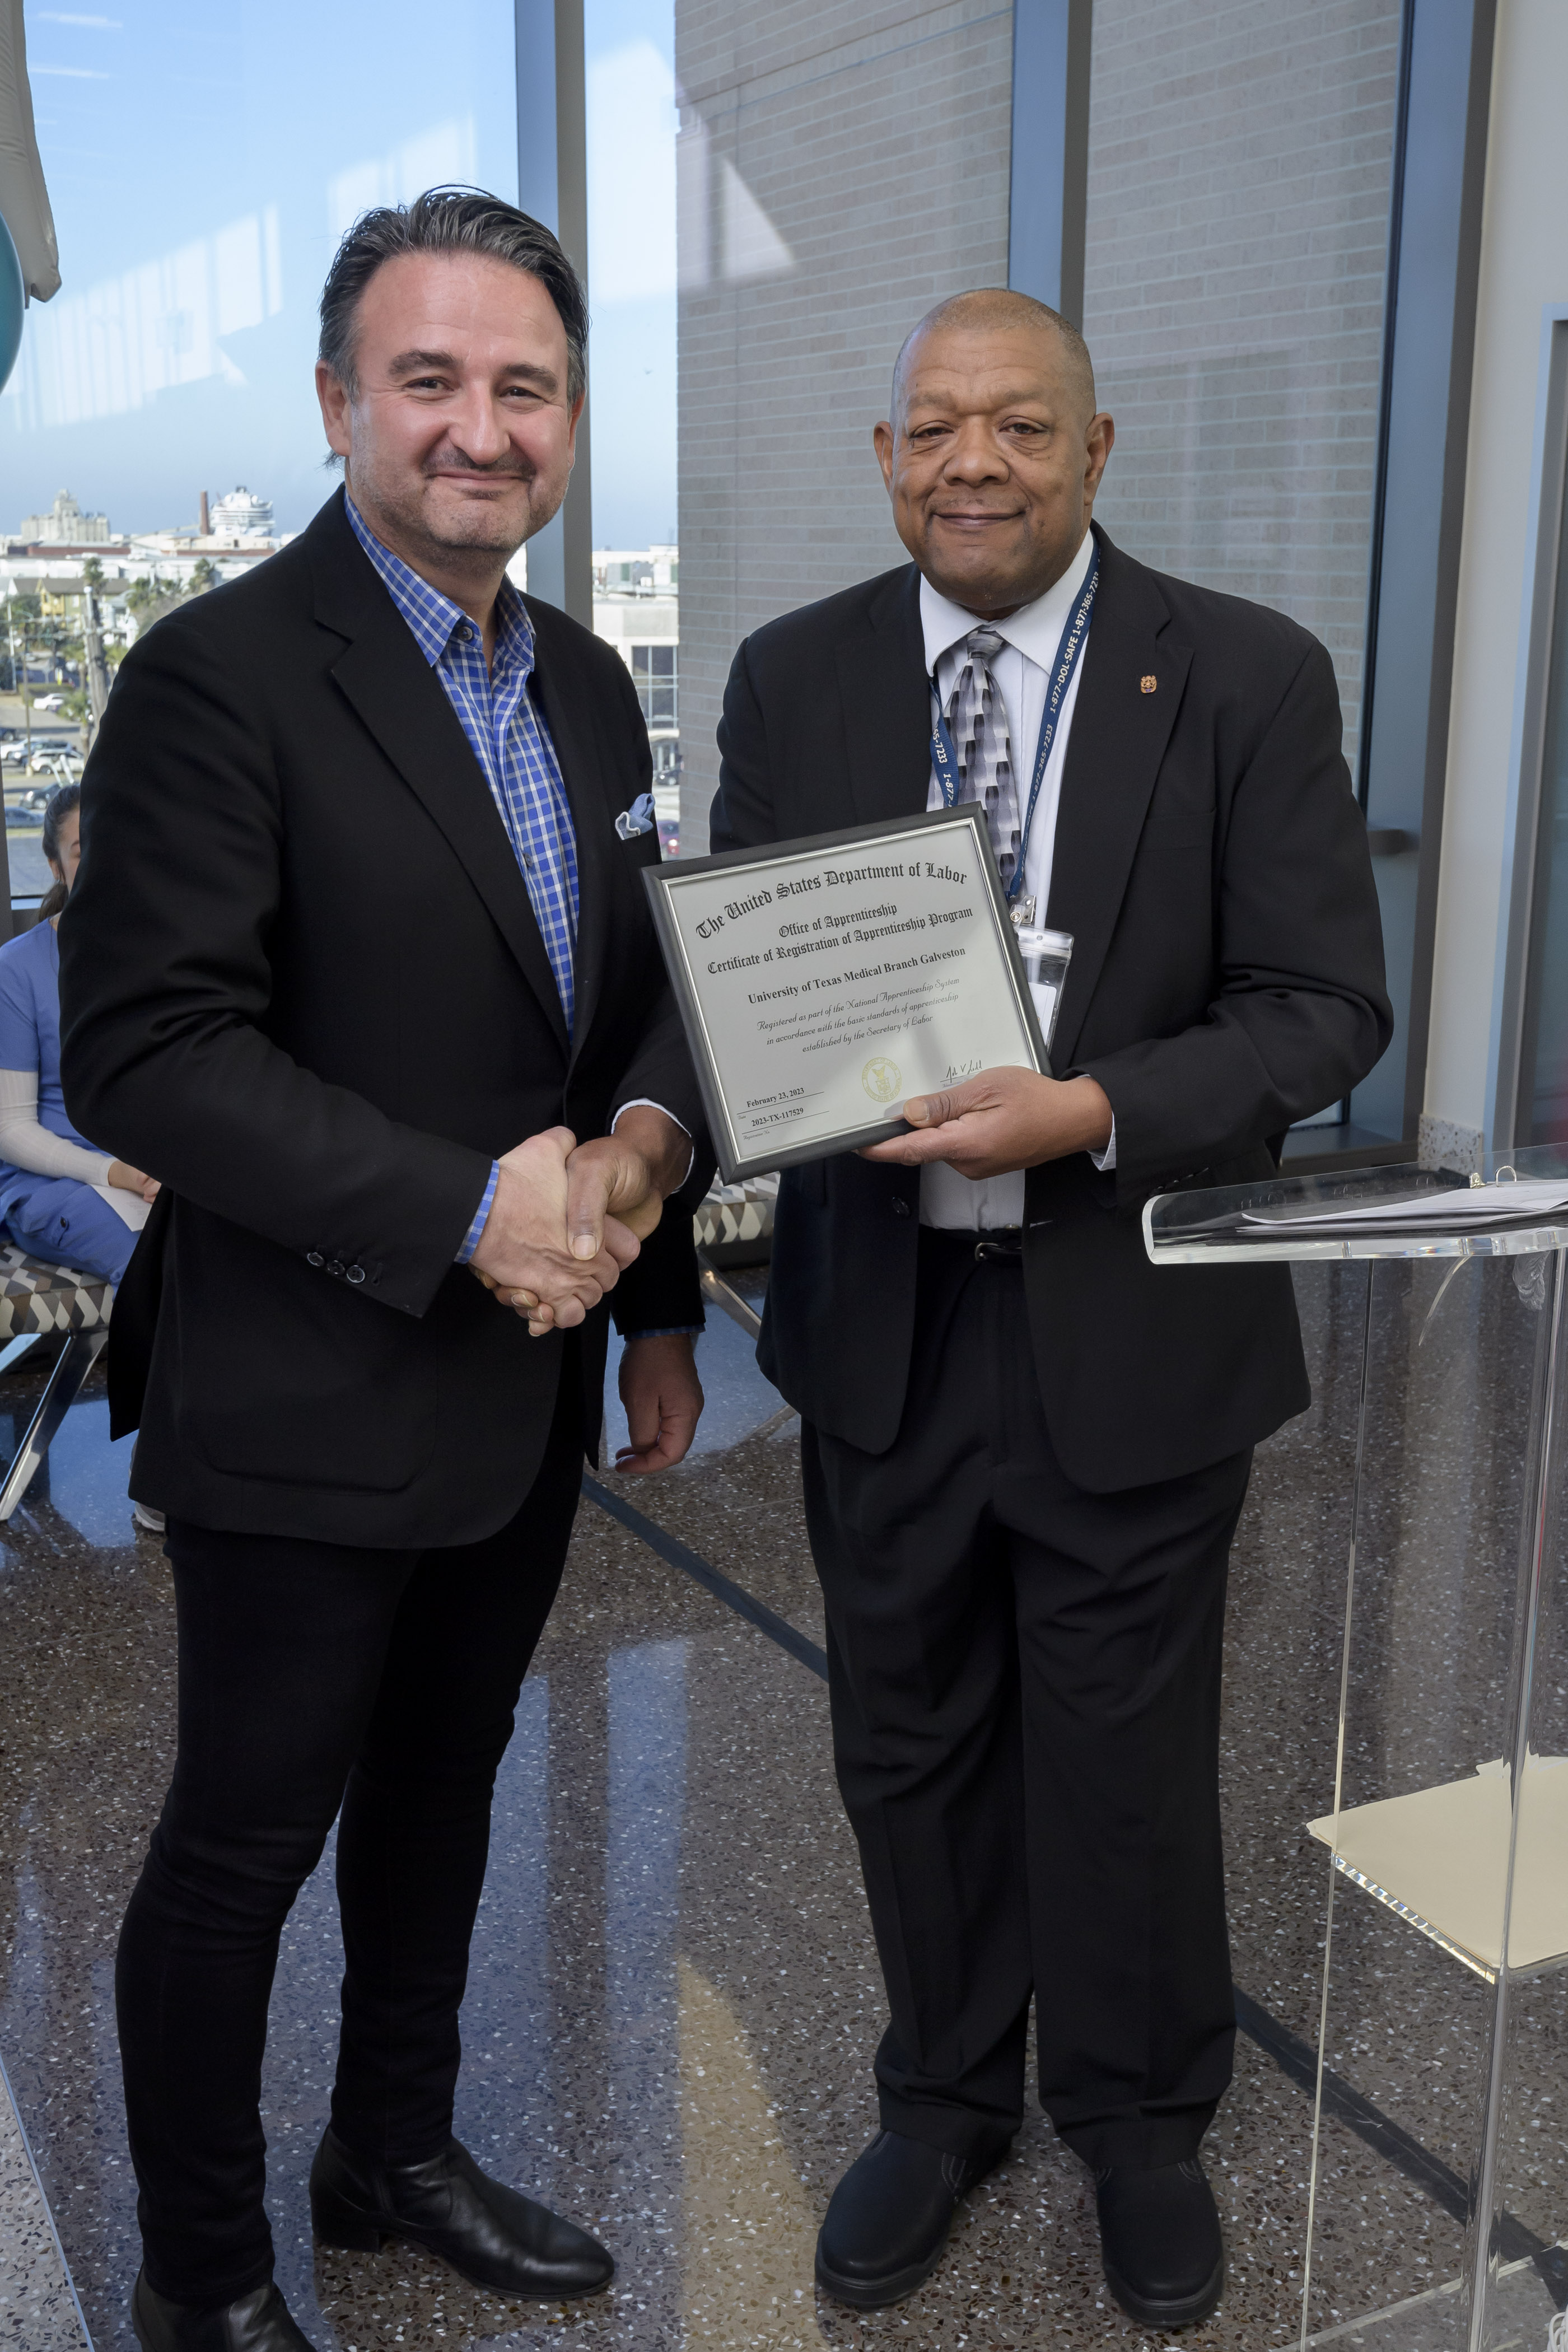 Dr. Reiser, president of UTMB, shaking hands and recieving a certificate